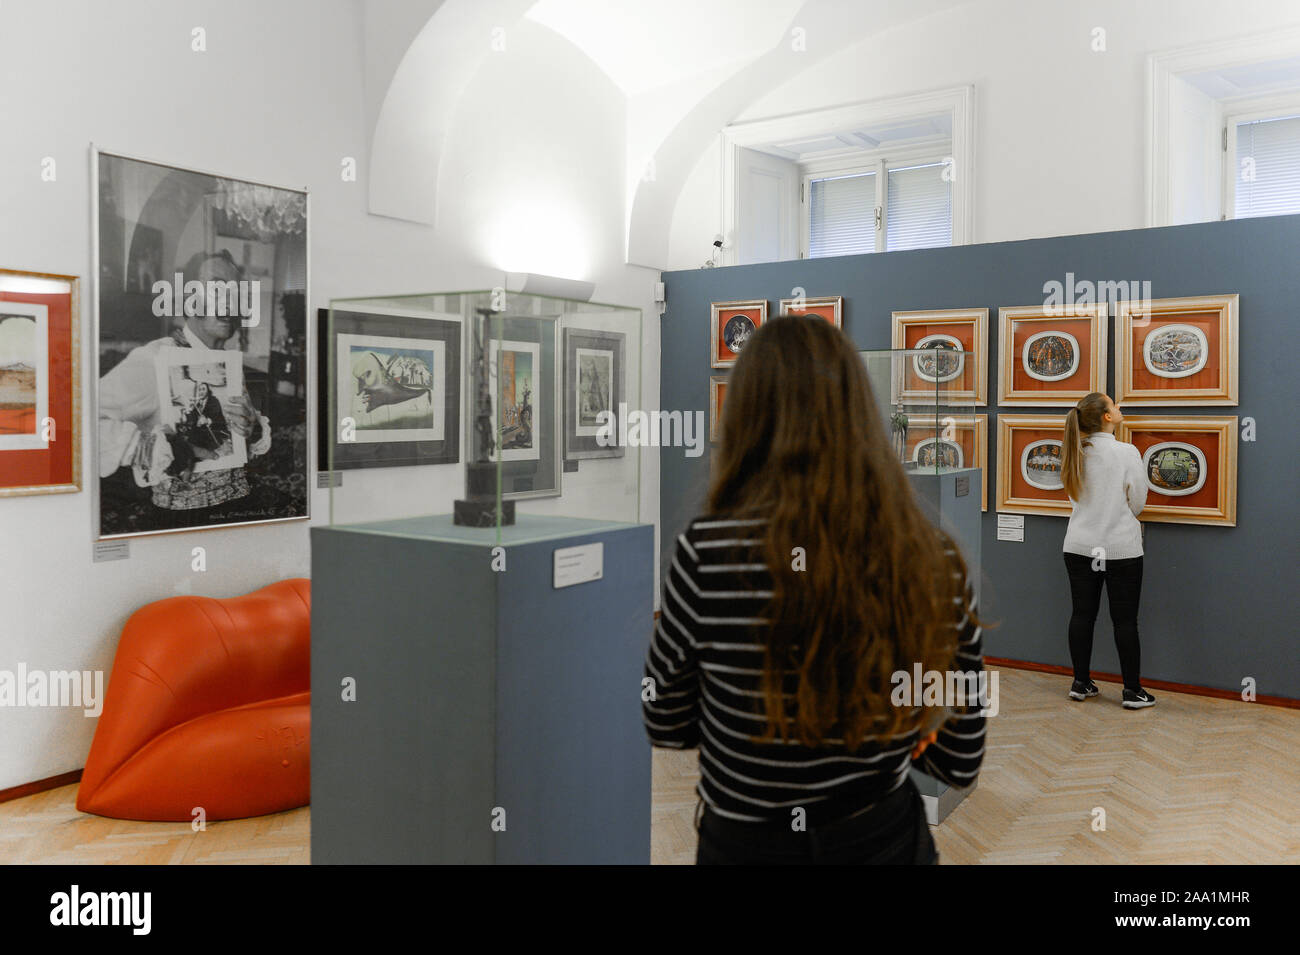 Prague, Czech Republic. 18th Nov, 2019. Visitors admire art works of the world famous Spanish artist, Salvador Dali during the exhibition.Central Gallery presents chronological exhibitions of Spanish artist Salvador Dali and American pop art master Andy Warhol. Both artists are among the biggest art influences in the art world. Credit: SOPA Images Limited/Alamy Live News Stock Photo